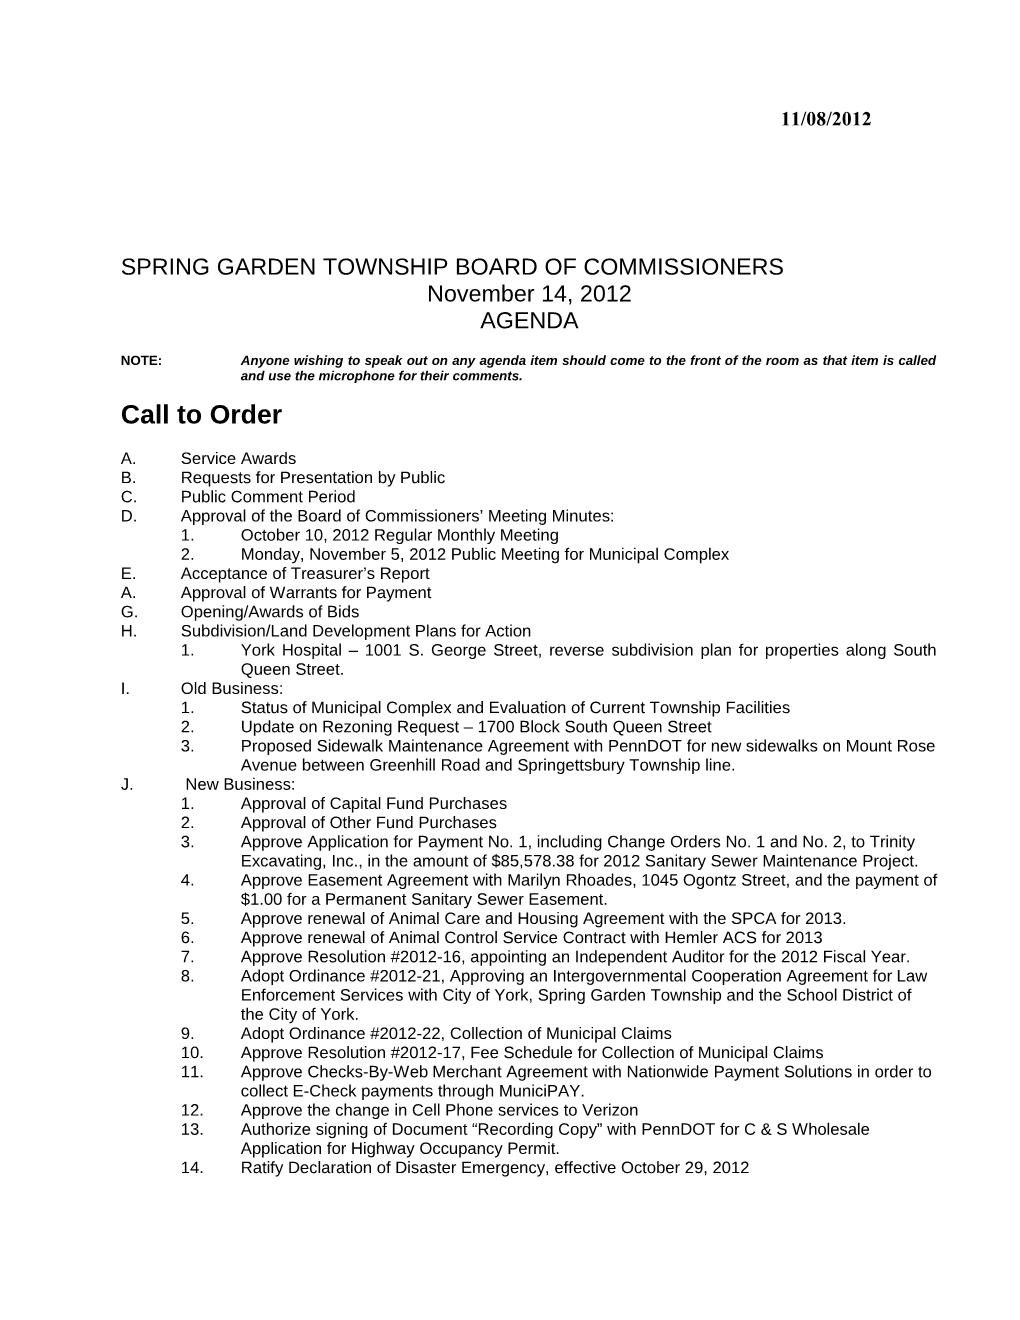 Spring Garden Township Board of Commissioners